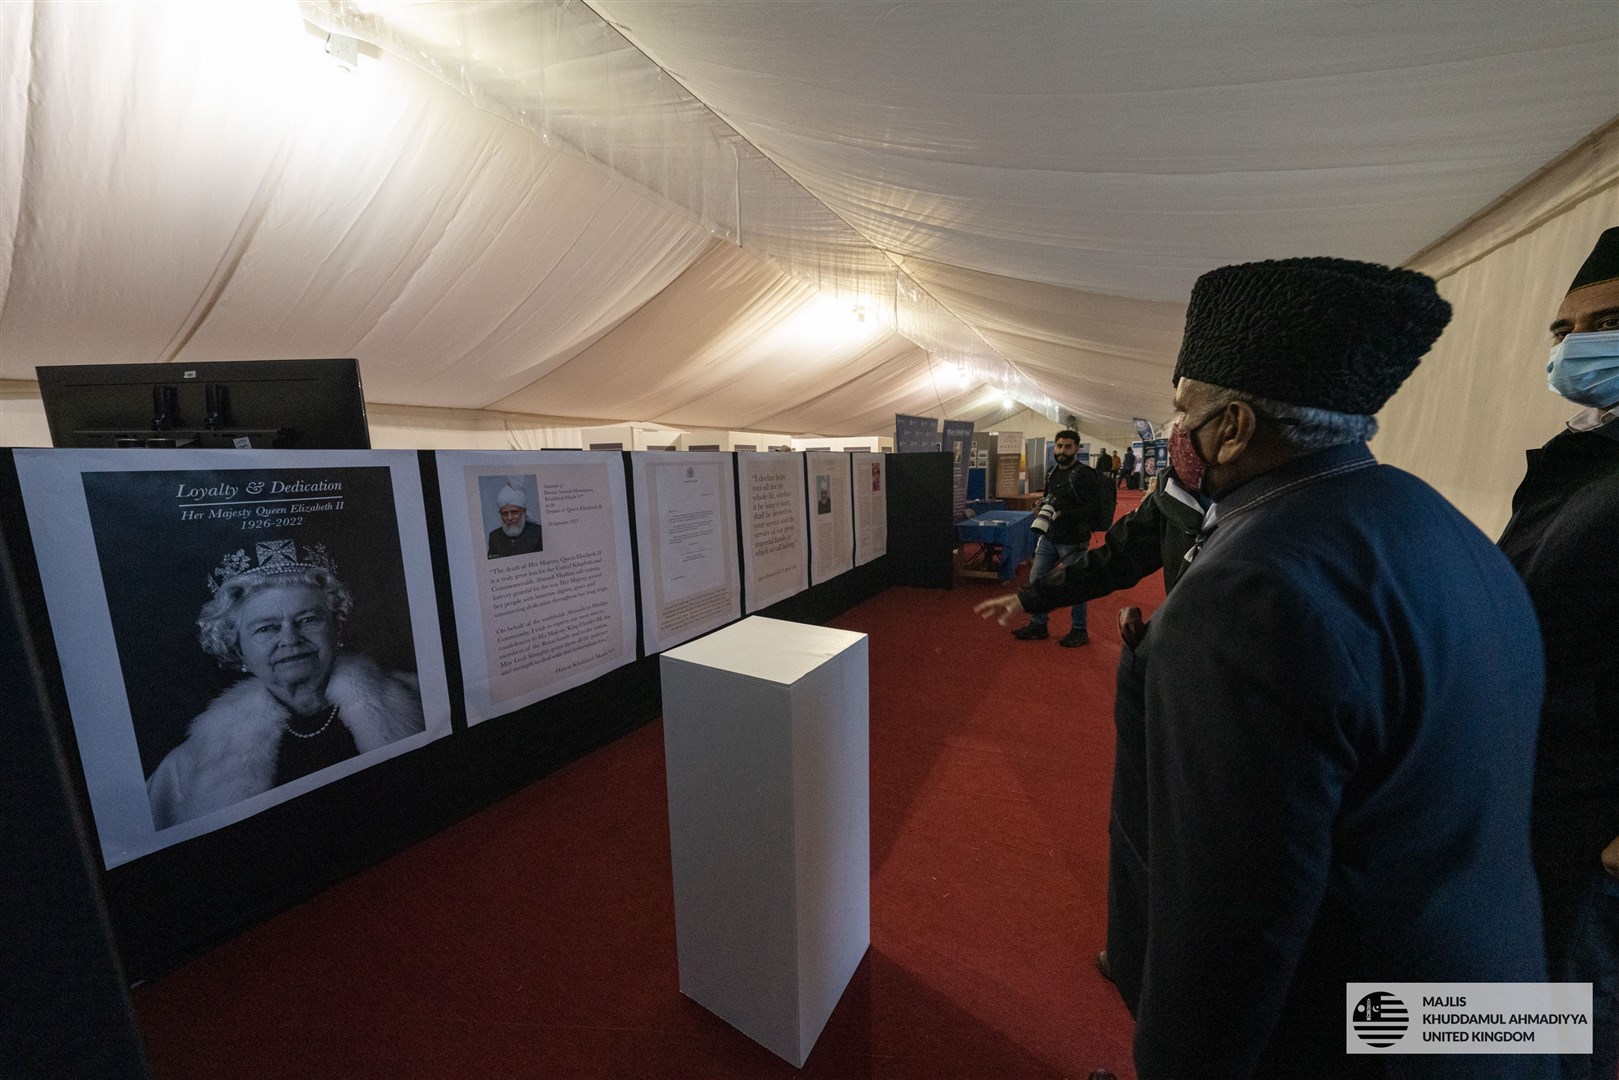 An exhibition has been launched to pay tribute to the Queen (Ahmadiyya Muslim Youth Association UK/PA)